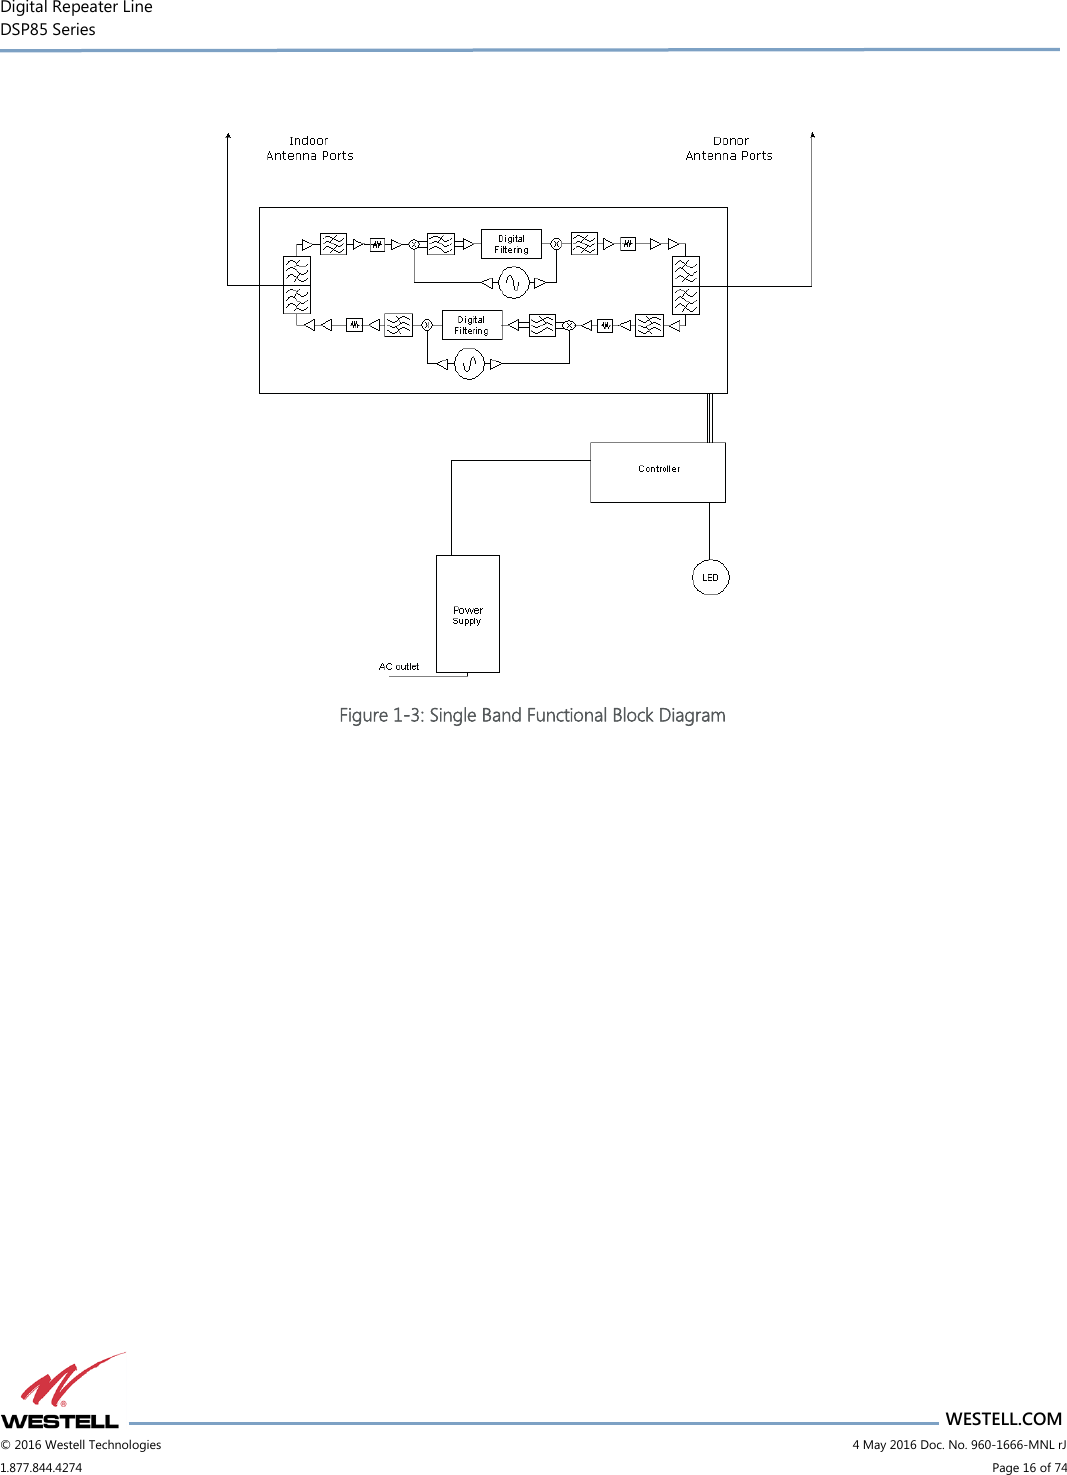 Digital Repeater Line DSP85 Series                       WESTELL.COM © 2016 Westell Technologies                           4 May 2016 Doc. No. 960-1666-MNL rJ 1.877.844.4274                             Page 16 of 74    Figure 1-3: Single Band Functional Block Diagram    